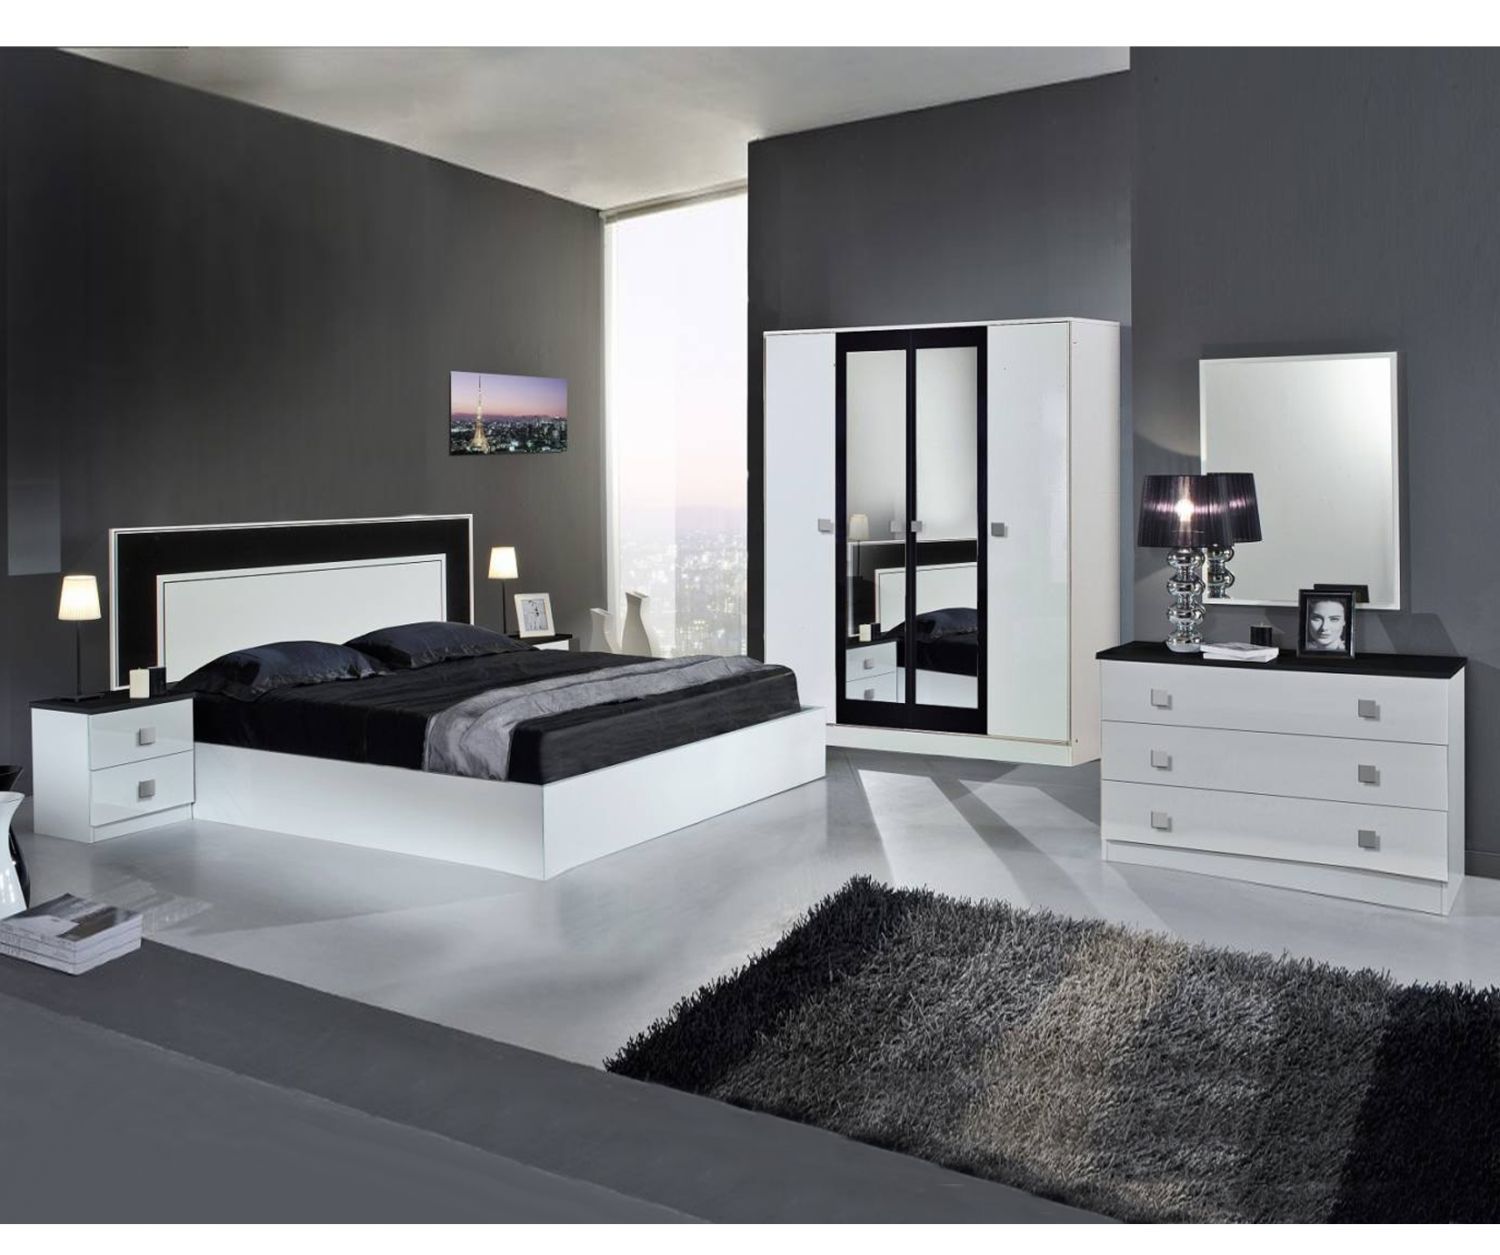 Dima Mobili Amal White And Black Bedroom Set With 4 Door Wardrobe Pertaining To Black And White Wardrobes Set (View 5 of 15)